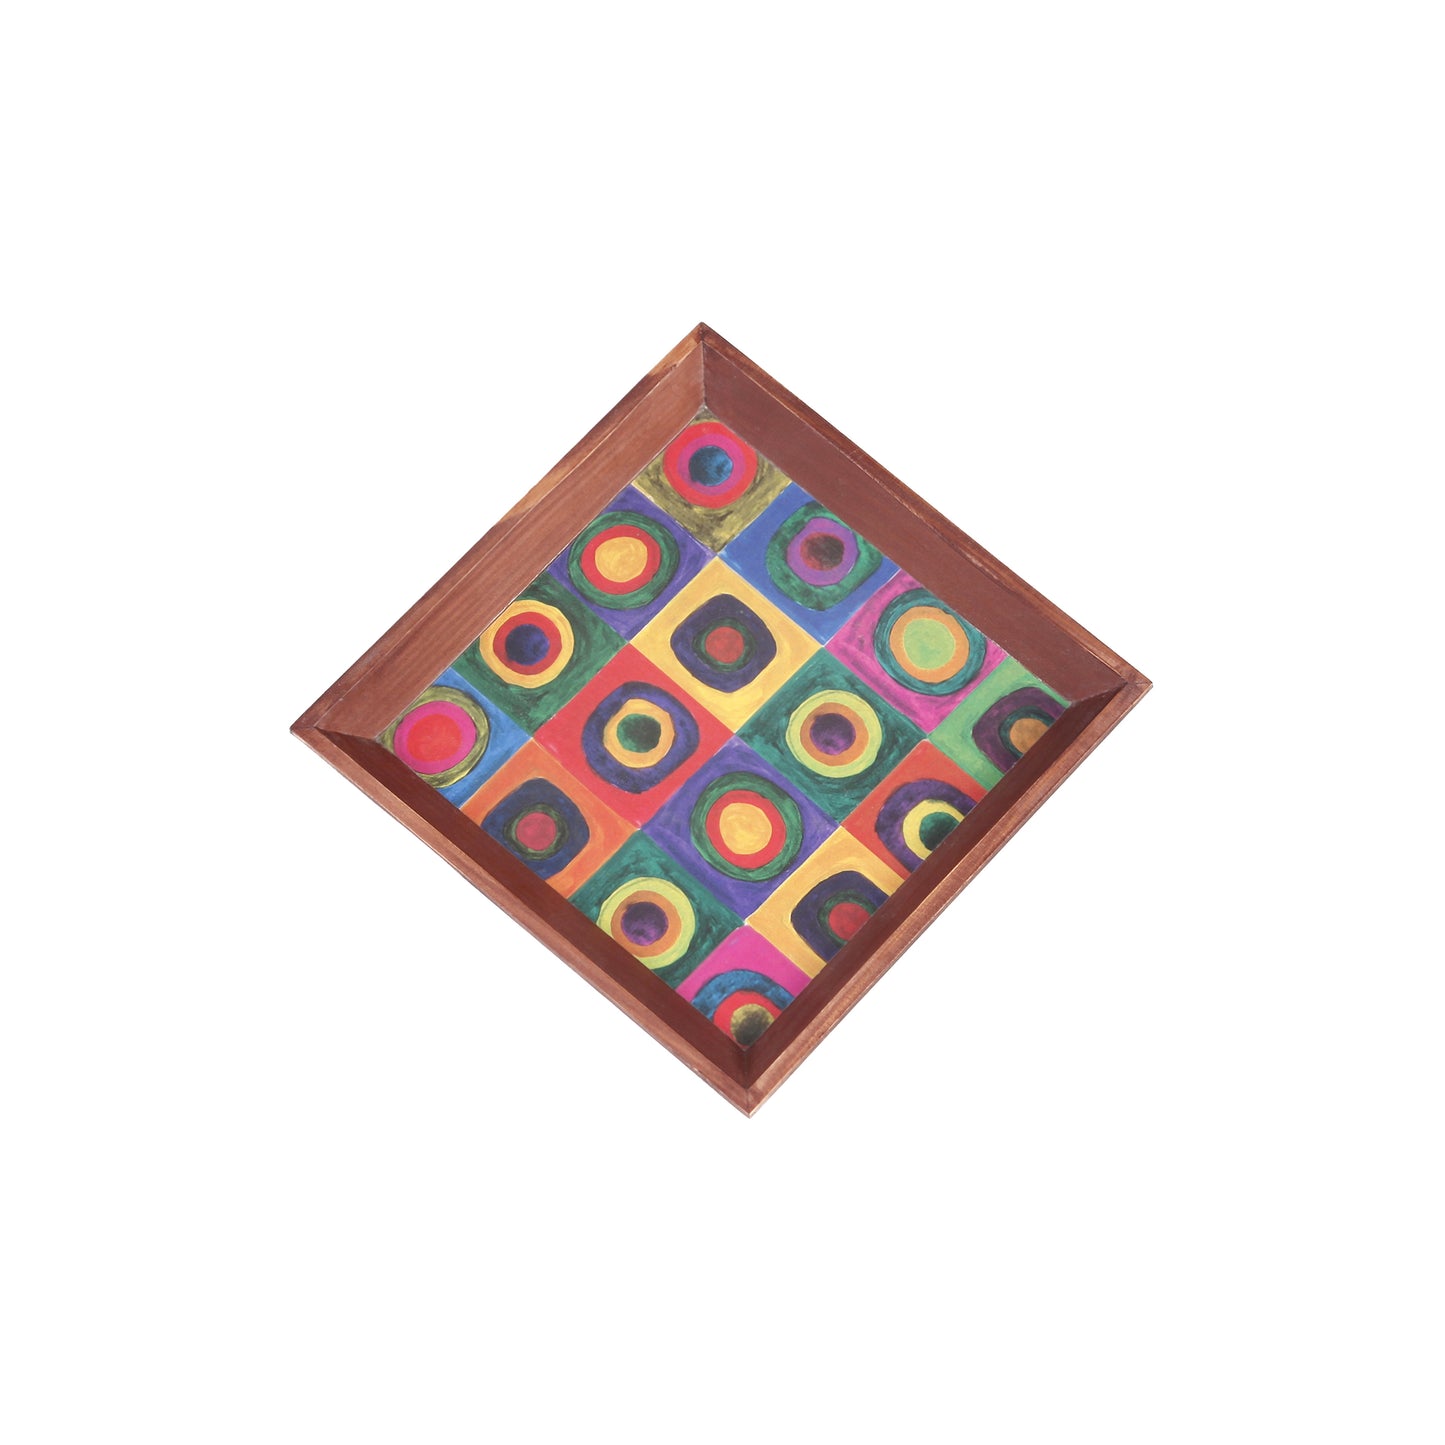 A Tiny Mistake Modern Art Small Square Wooden Serving Tray, 18 x 18 x 2 cm